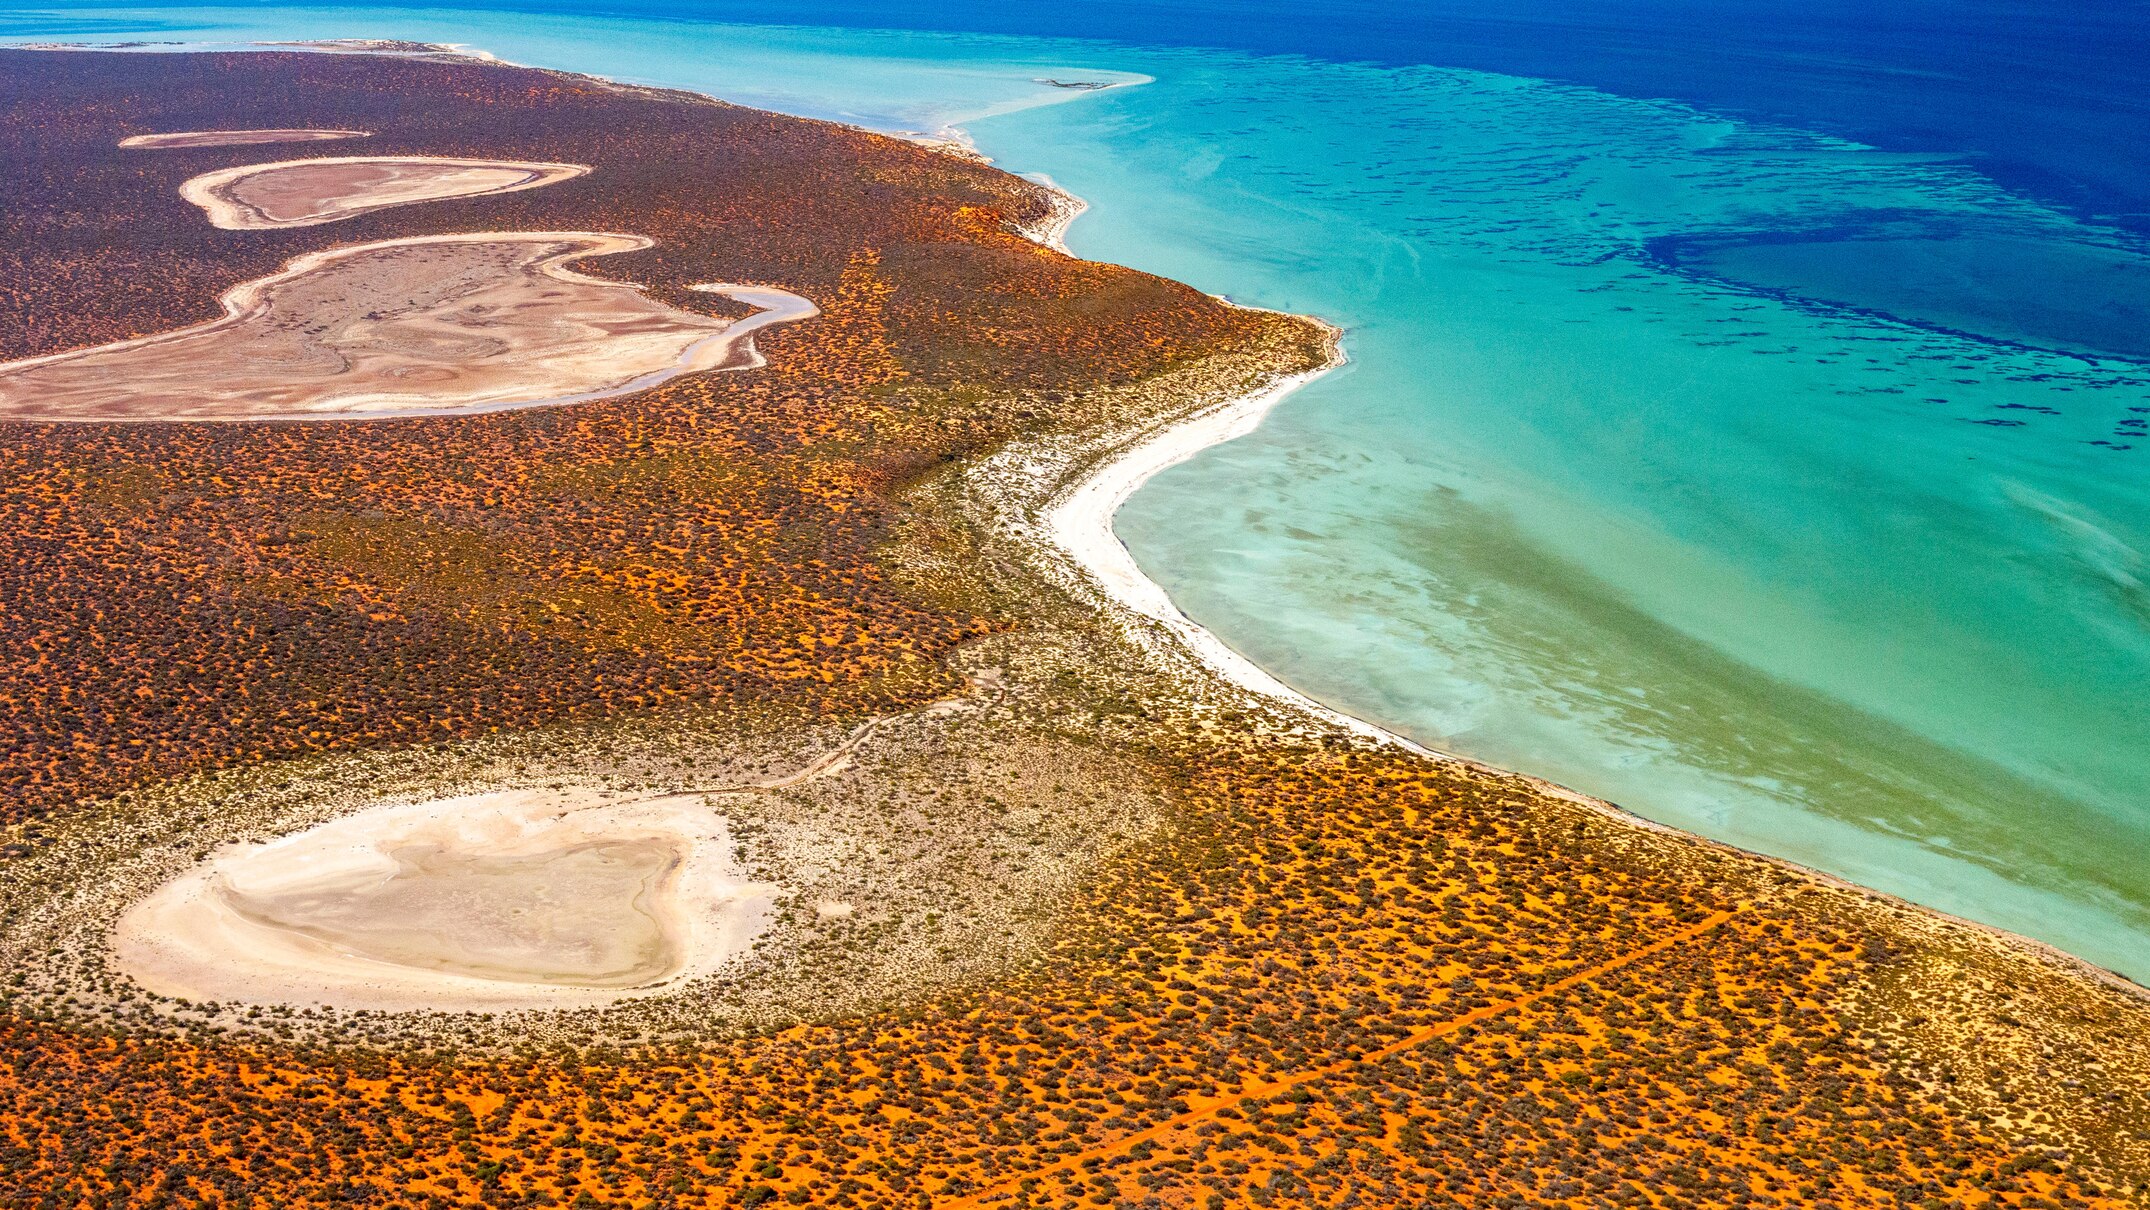 western australia's shark bay seabeds are a ticking carbon time bomb, says scientist